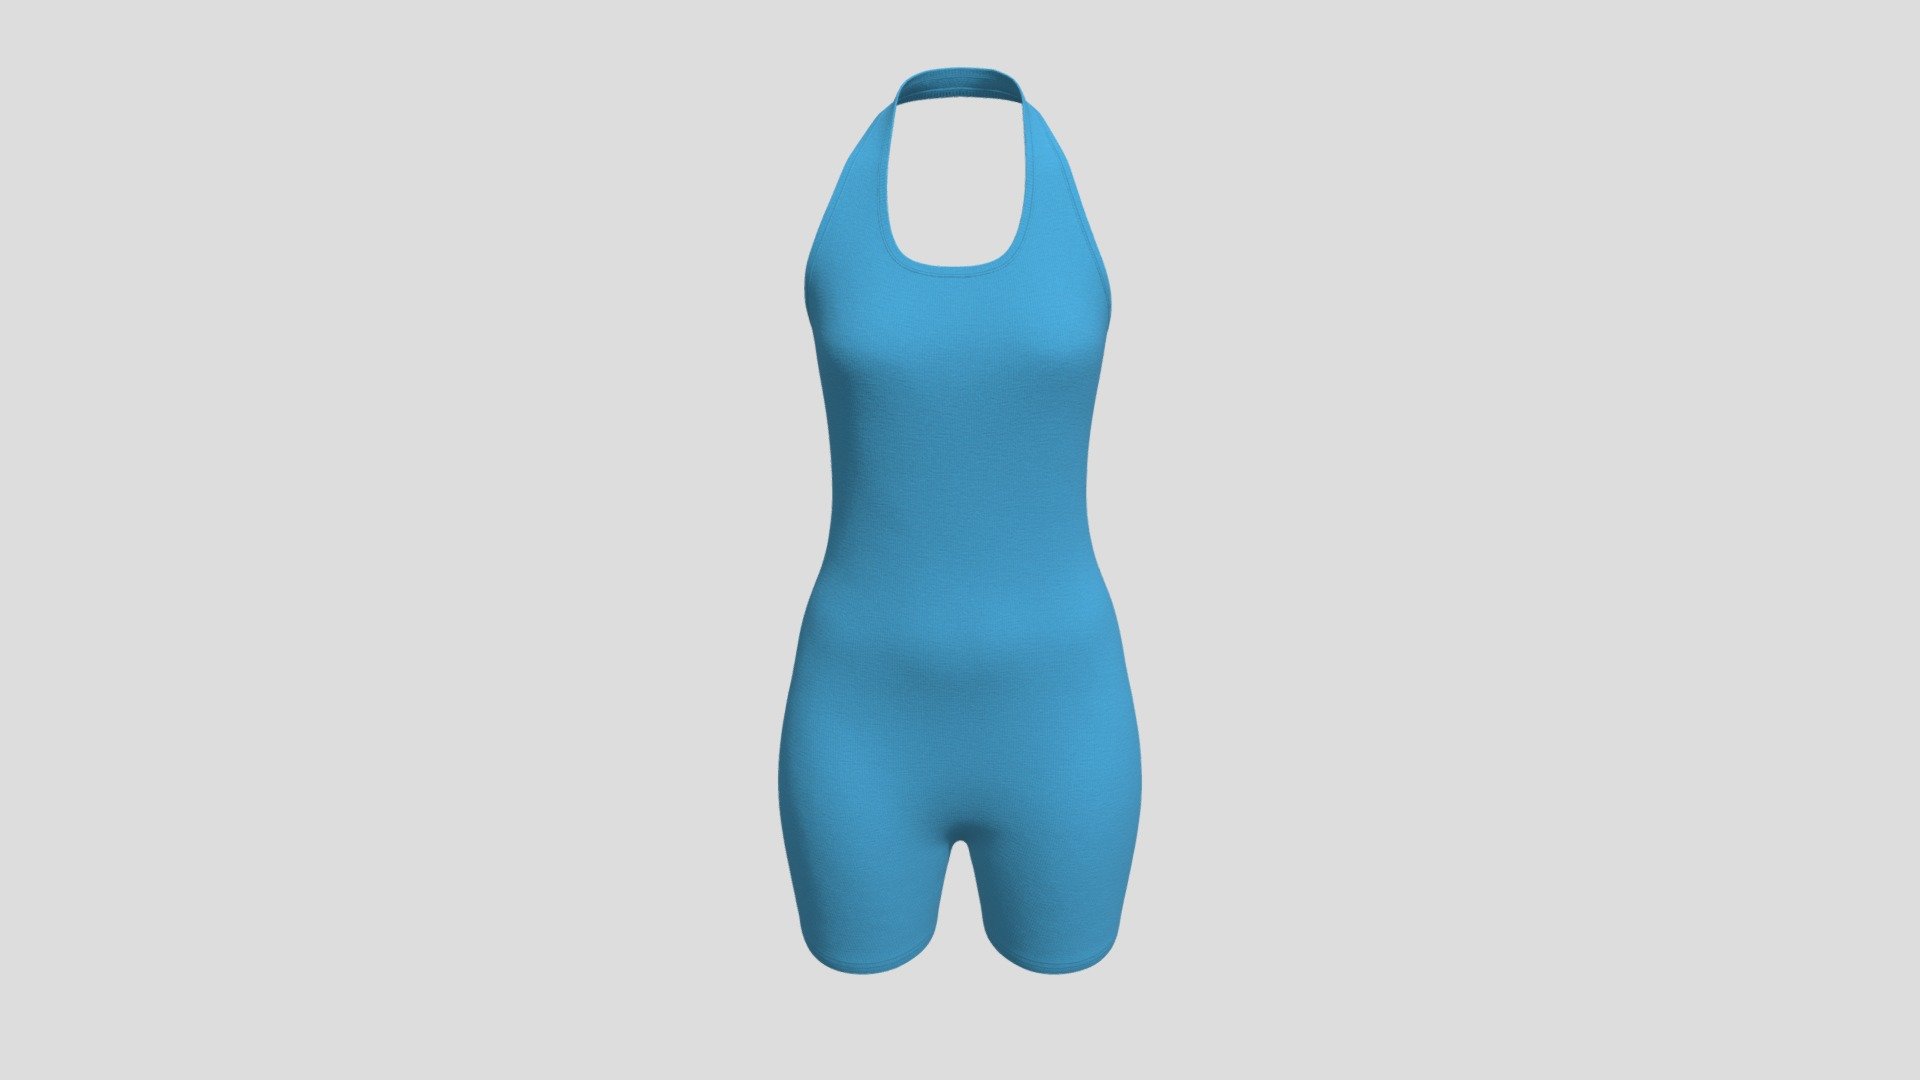 Cloth Title = Double Strap One Piece Cheeky Swimsuit 

SKU = DG100150 

Category = Women 

Product Type = Swimsuit 

Cloth Length = Regular 

Body Fit = Skinny Fit 
 
Occasion = Beach 


Our Services:

3D Apparel Design.

OBJ,FBX,GLTF Making with High/Low Poly.

Fabric Digitalization.

Mockup making.

3D Teck Pack.

Pattern Making.

2D Illustration.

Cloth Animation and 360 Spin Video.


Contact us:- 

Email: info@digitalfashionwear.com 

Website: https://digitalfashionwear.com 


We designed all the types of cloth specially focused on product visualization, e-commerce, fitting, and production. 

We will design: 

T-shirts 

Polo shirts 

Hoodies 

Sweatshirt 

Jackets 

Shirts 

TankTops 

Trousers 

Bras 

Underwear 

Blazer 

Aprons 

Leggings 

and All Fashion items. 





Our goal is to make sure what we provide you, meets your demand 3d model